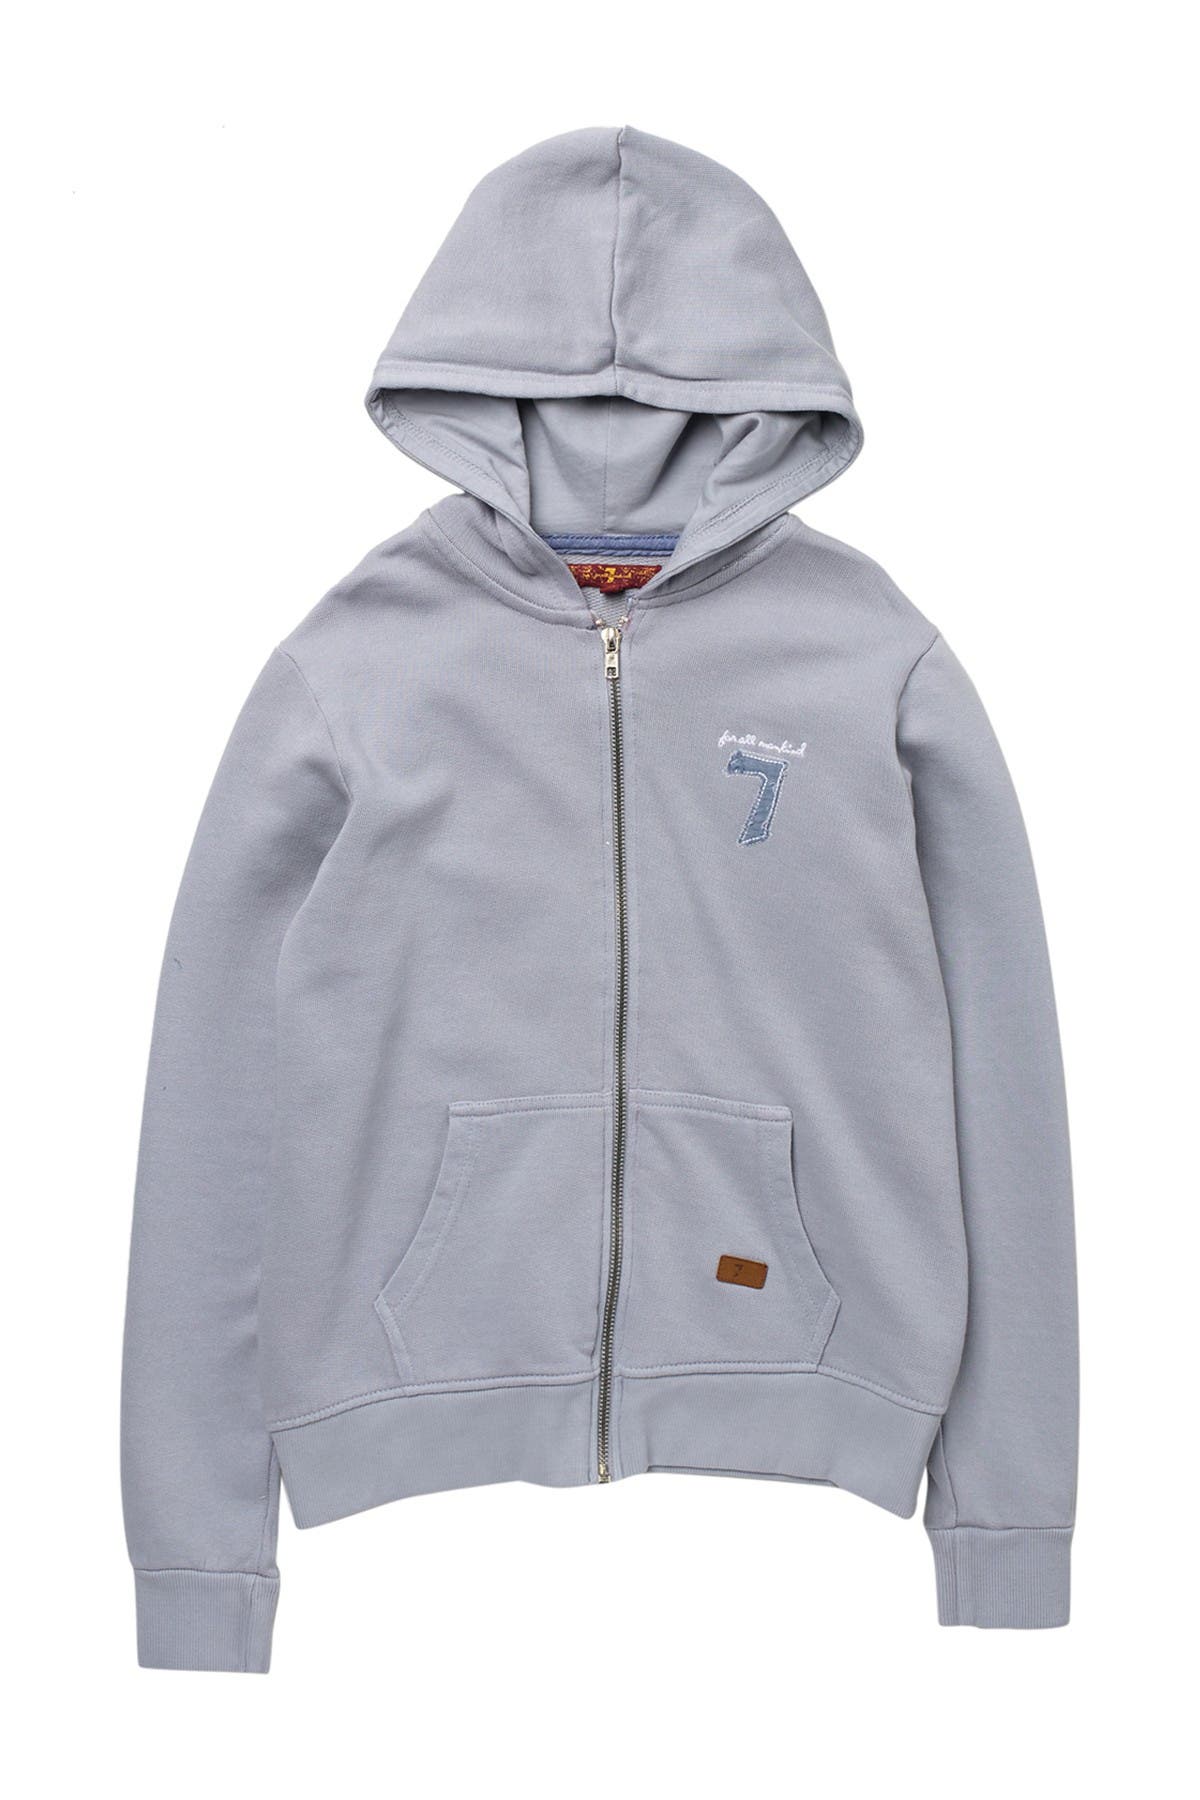 7 For All Mankind | Graphic Zip Hoodie | Nordstrom Rack